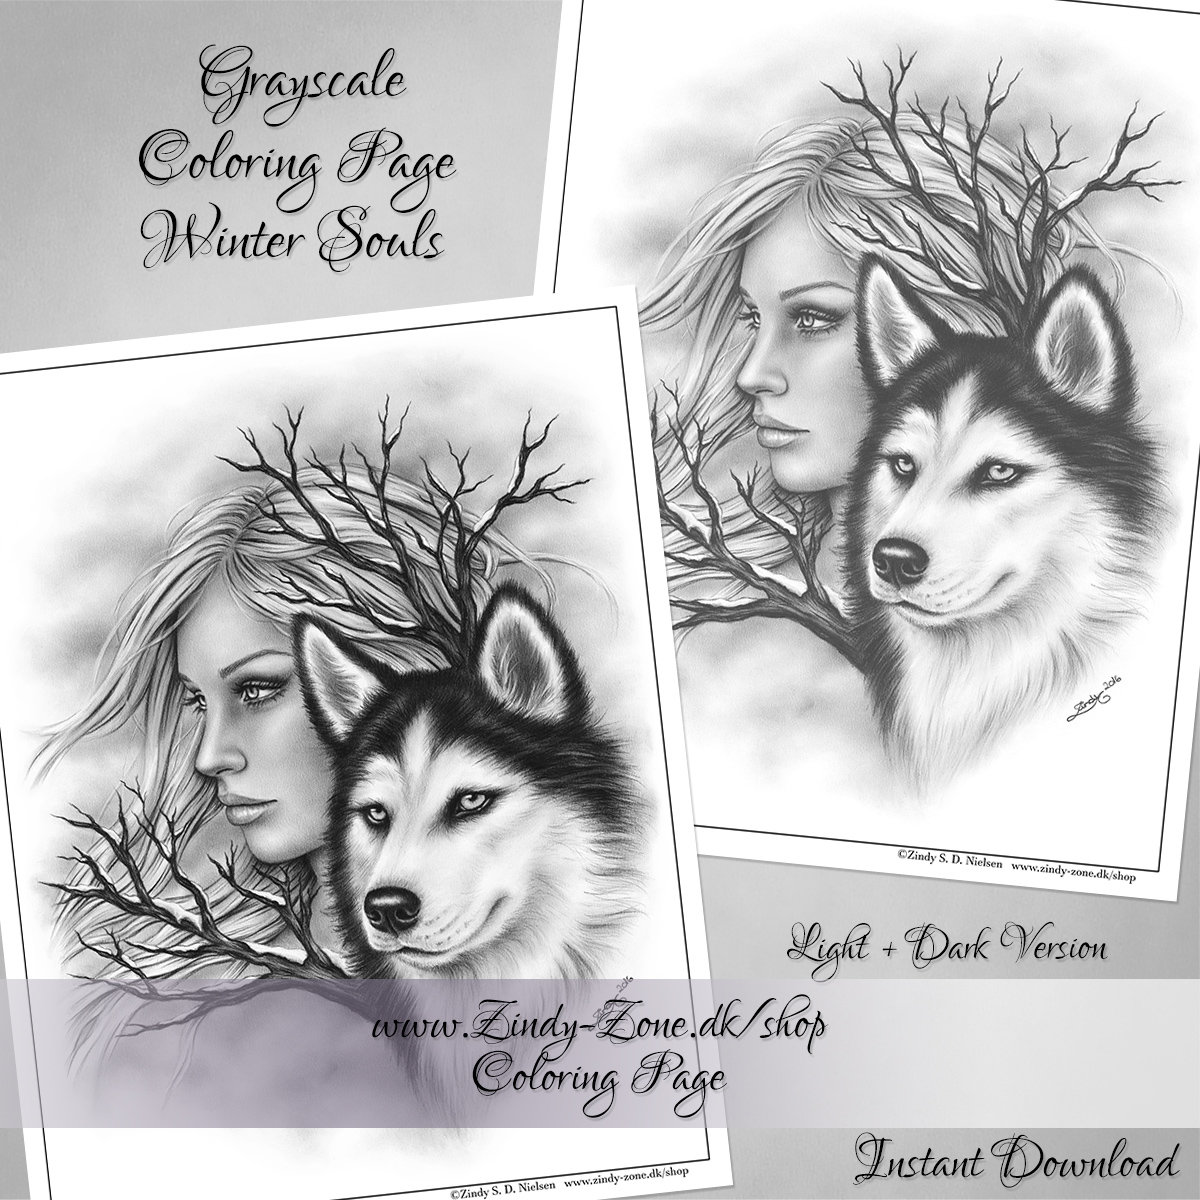 Grayscale coloring page winter souls woman wolf husky dog animal branch zindy nielsen